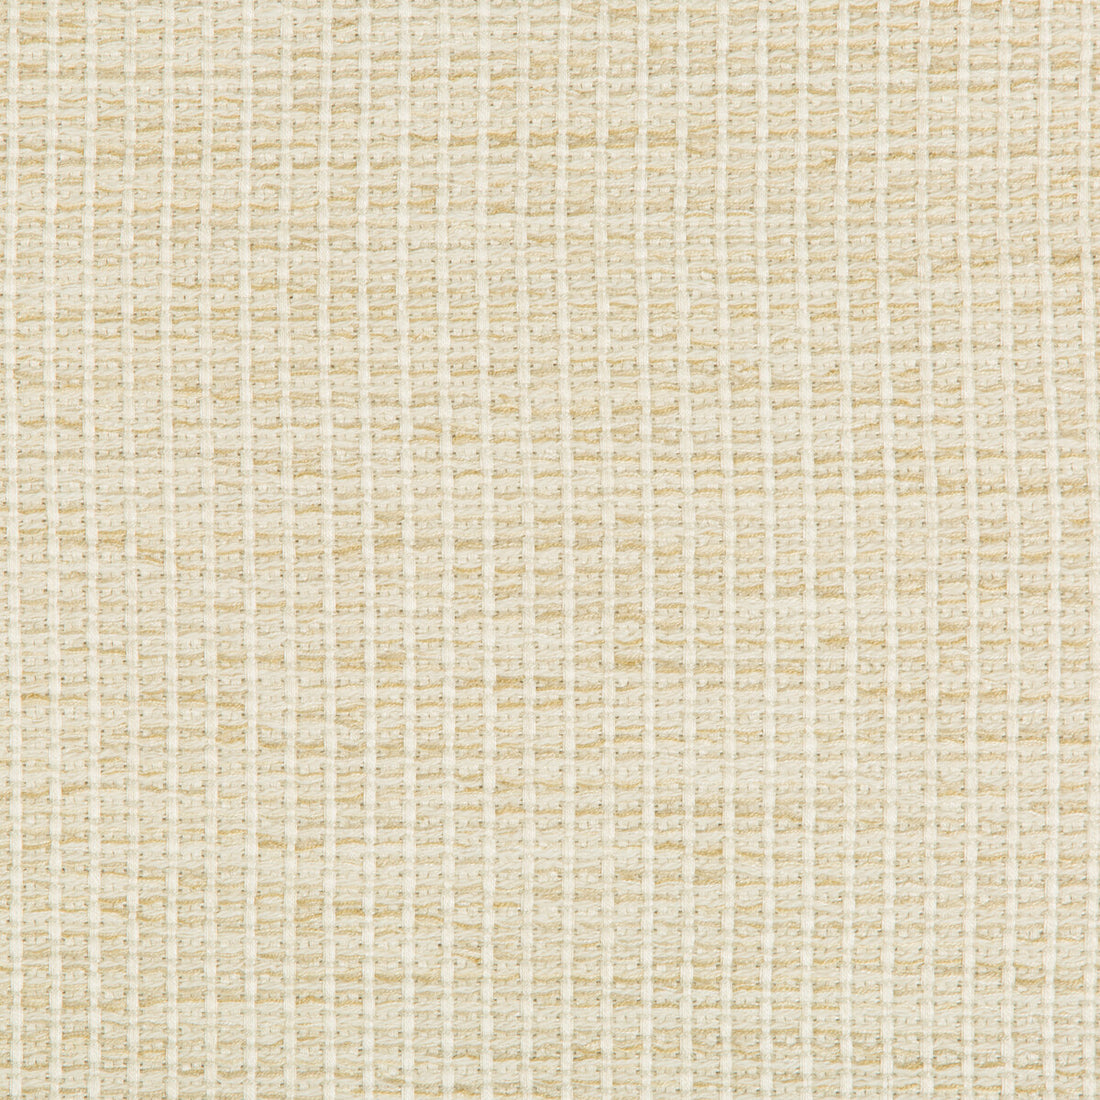 Kravet Design fabric in 35123-116 color - pattern 35123.116.0 - by Kravet Design in the Performance Crypton Home collection